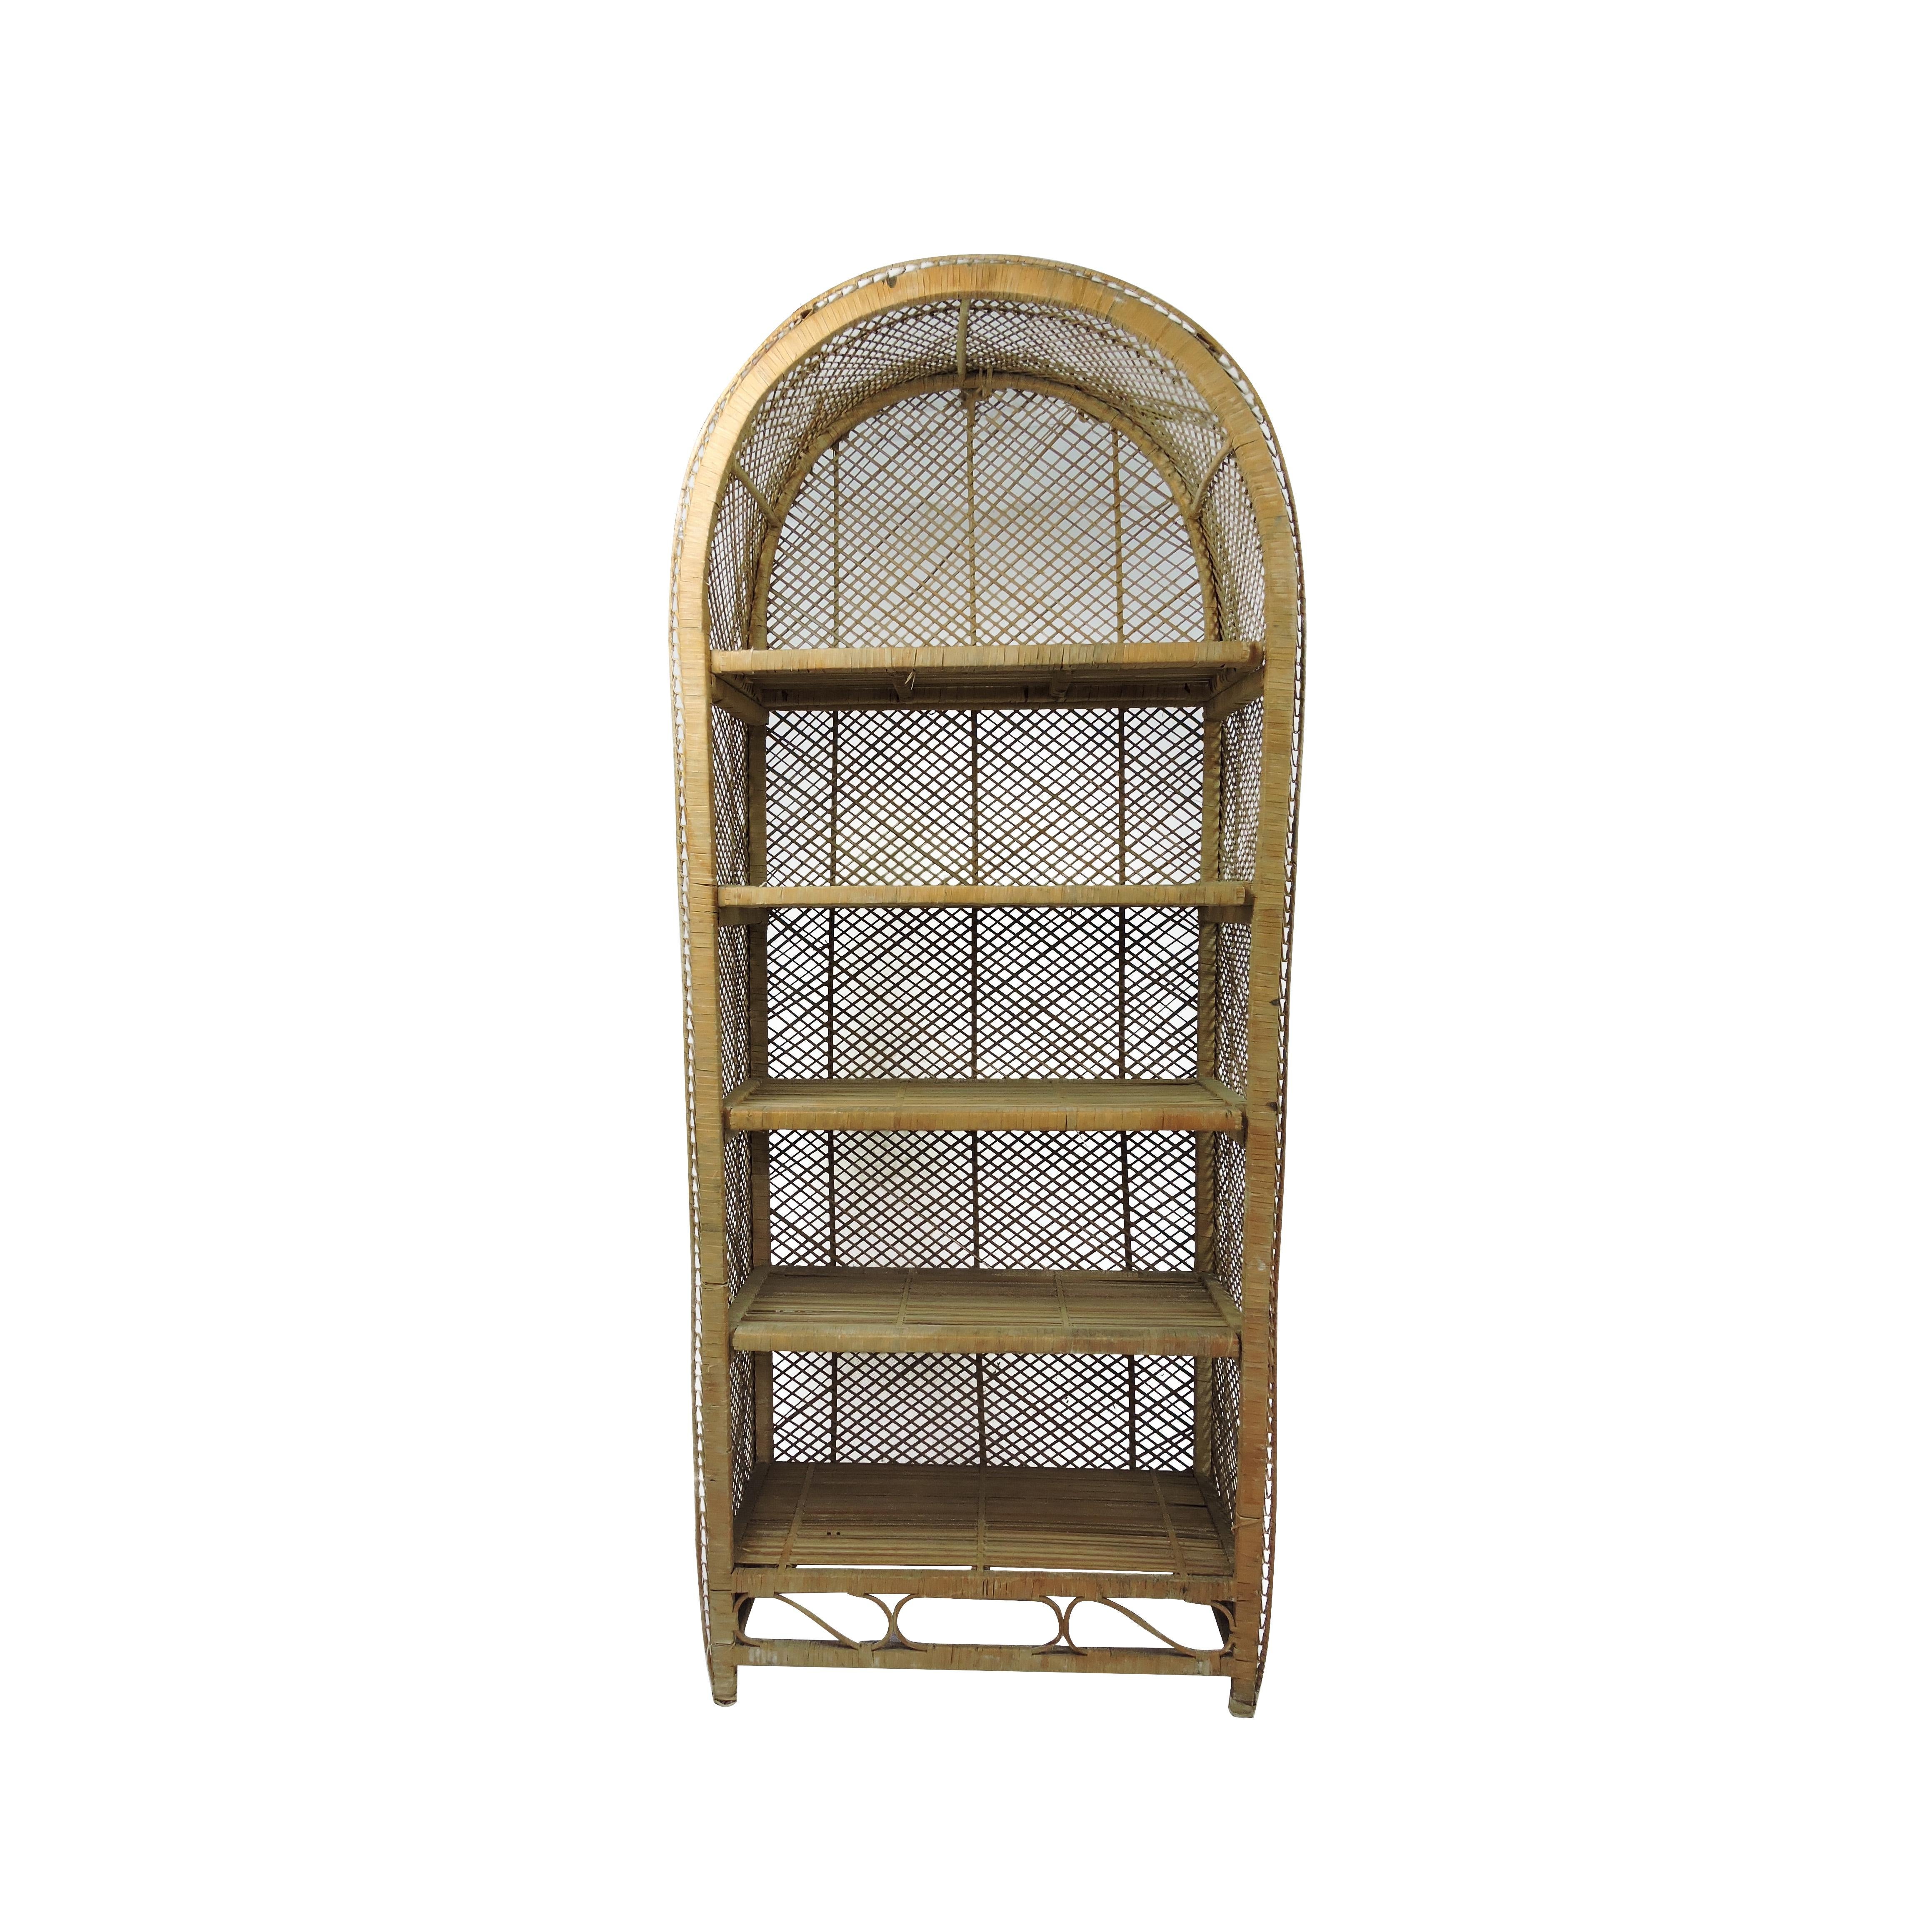 A vintage rattan bookshelf/ Bohemian bookcase with arched top and wrapped edges. The bookcase features four shelves.